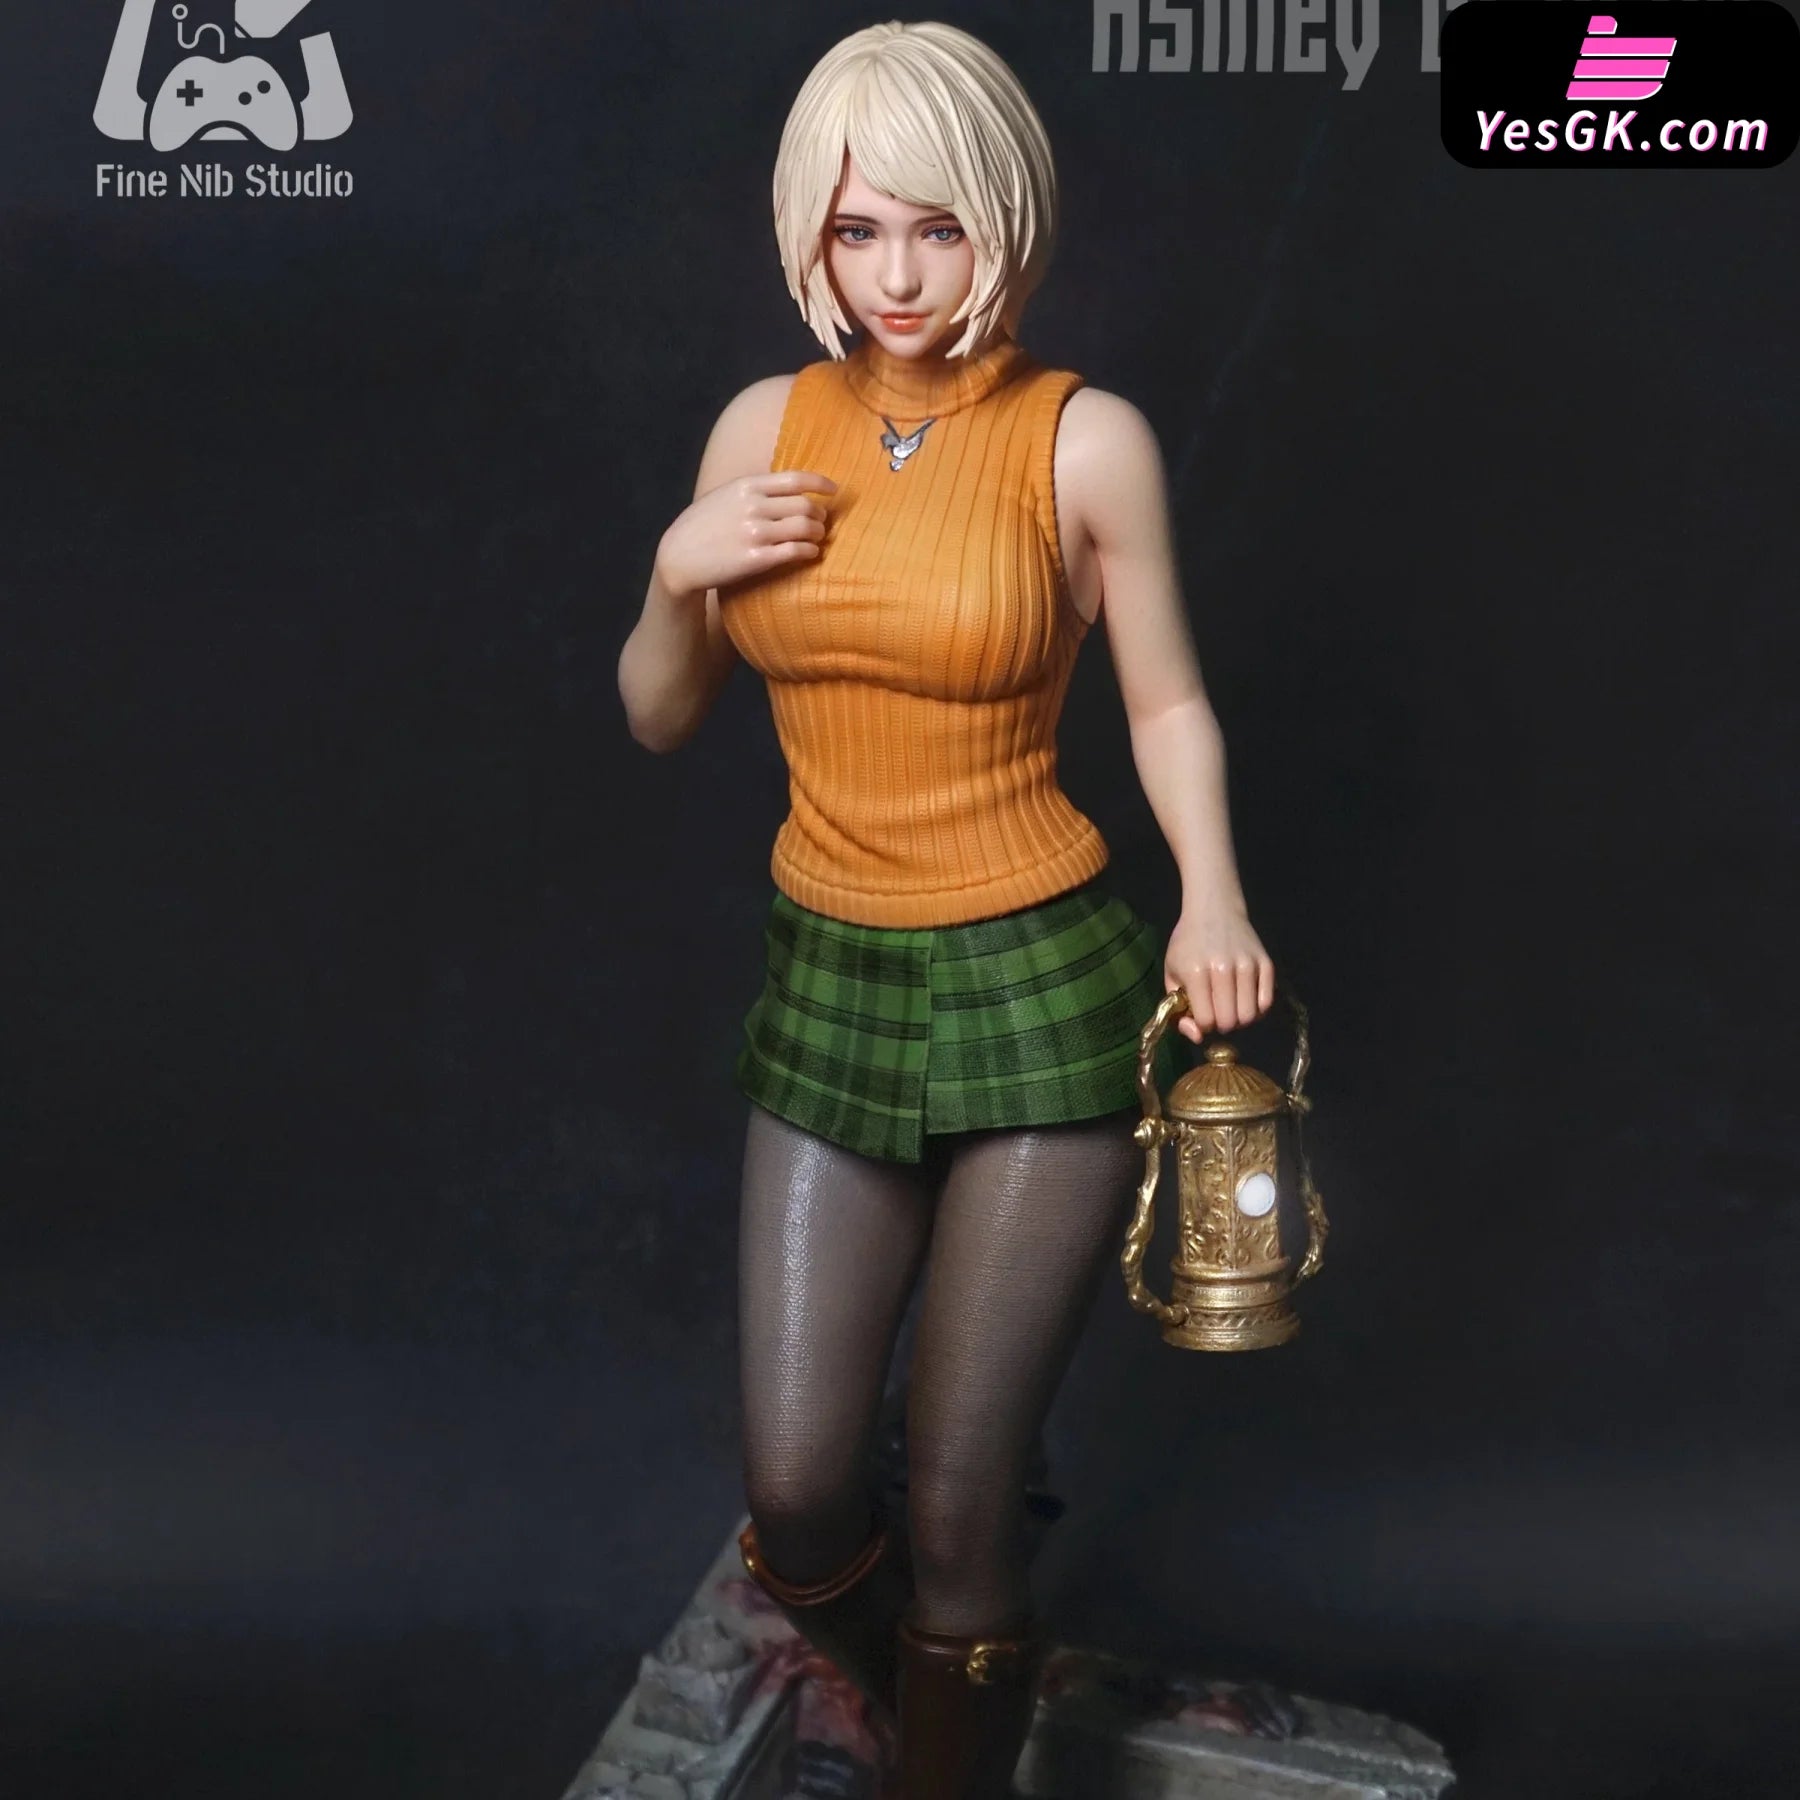 Manufacture x Hyperspace Studio Resident Evil 4 Ashley Graham